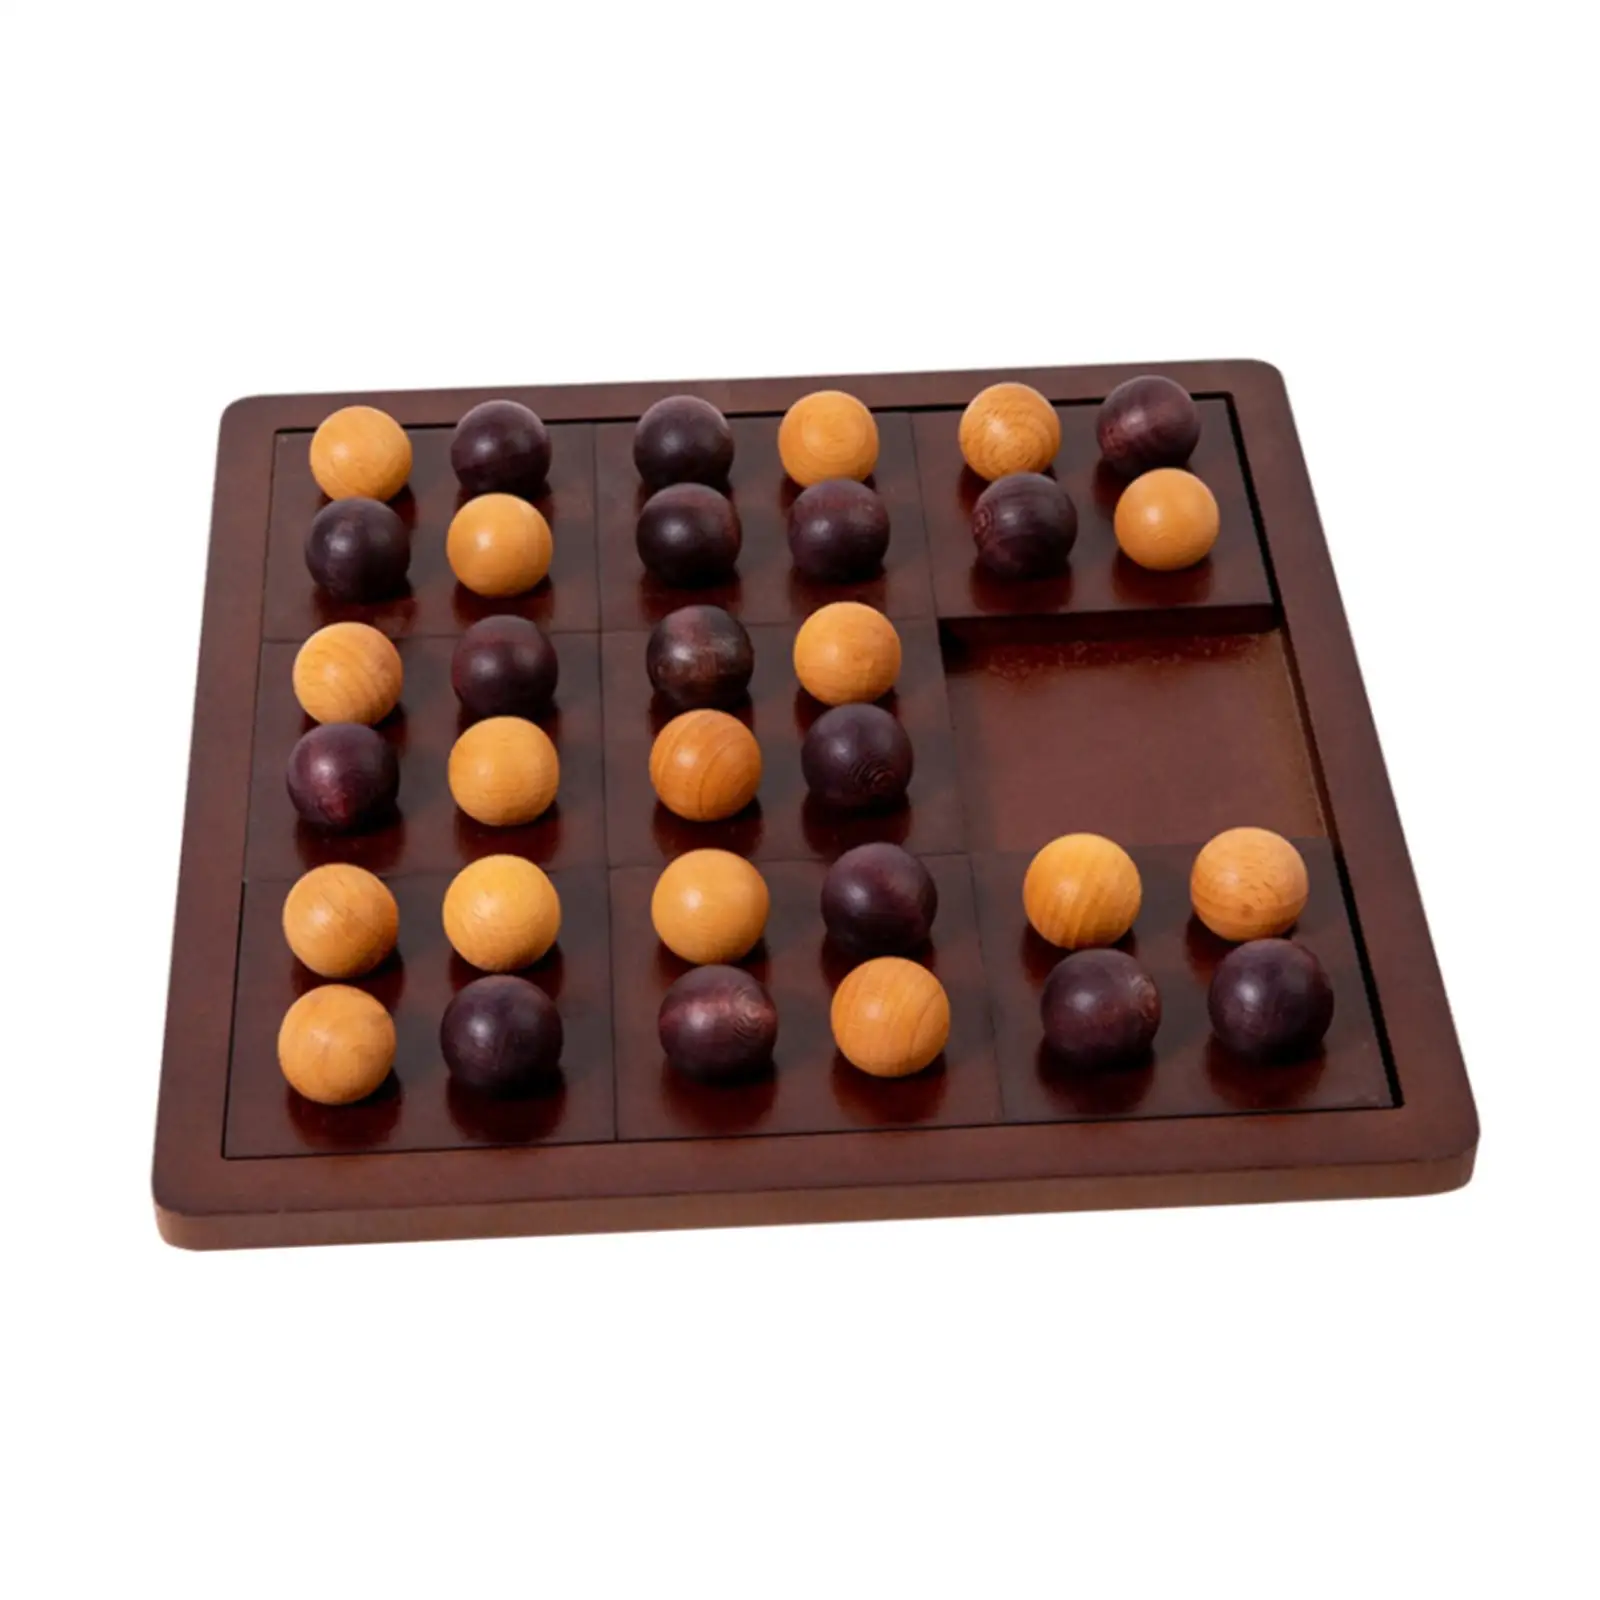 Tic TAC Toe Game Leisure Intelligent Classical Handmade Early Education Puzzle for Adult Indoor Outdoor Gifts Travel Plane Trips